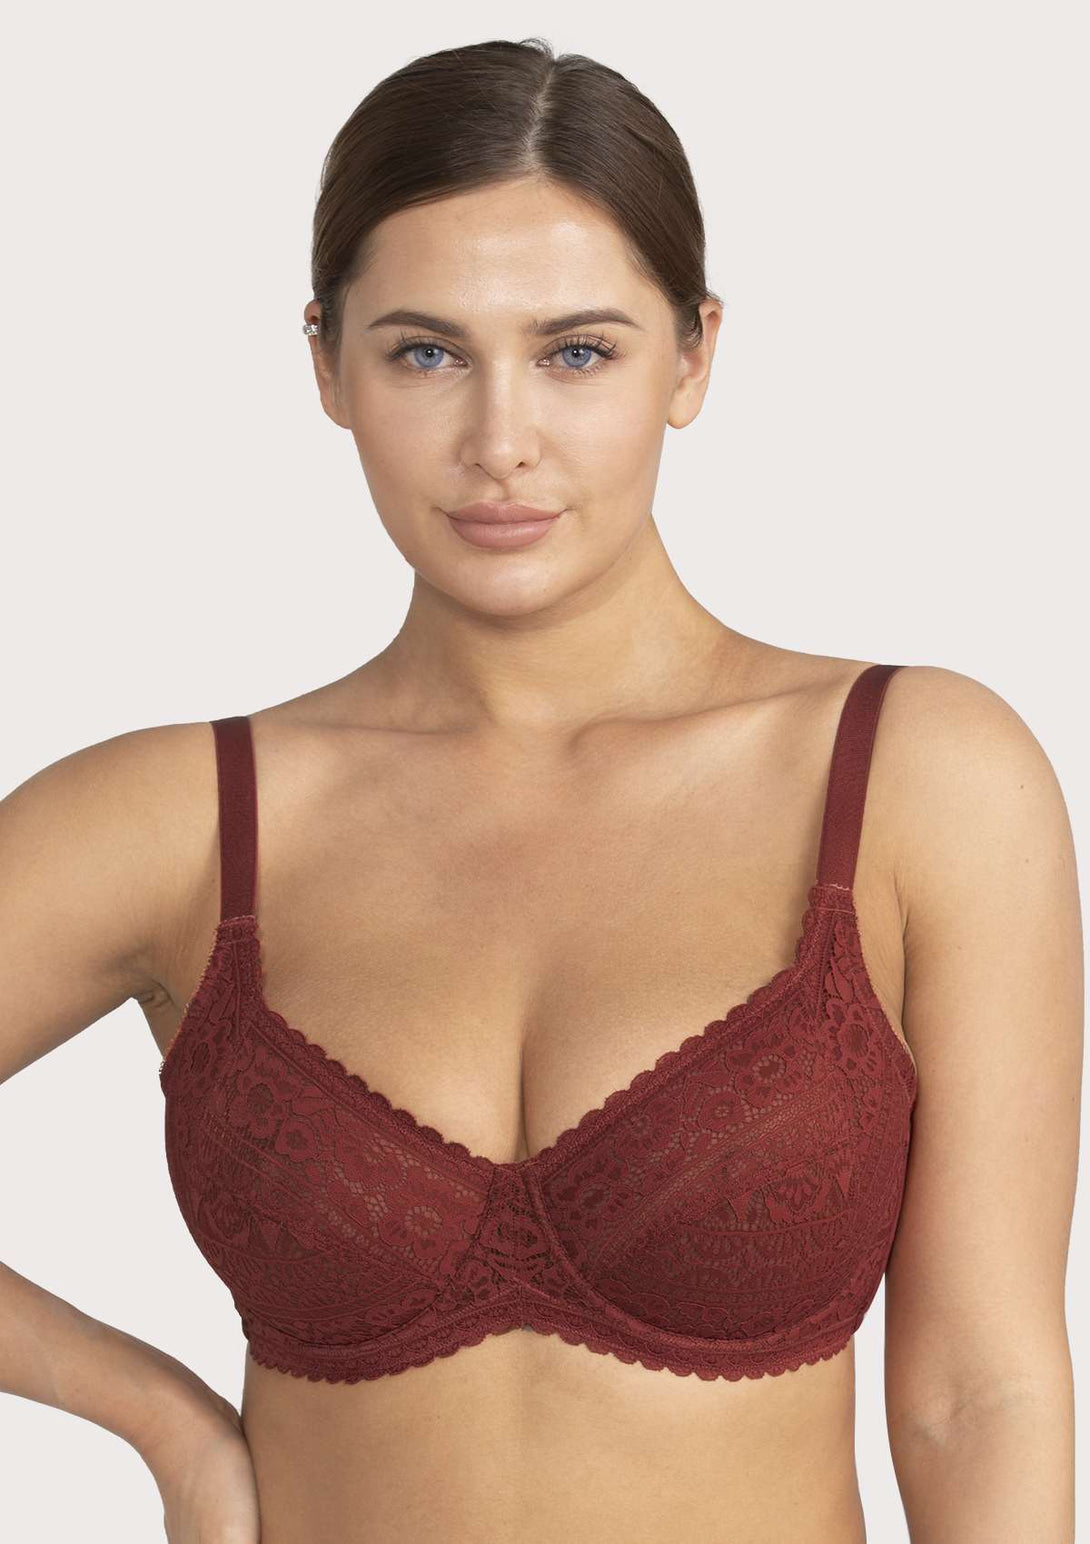 HSIA HSIA Leaf Flower Lace Unlined Bra Red / 34 / C